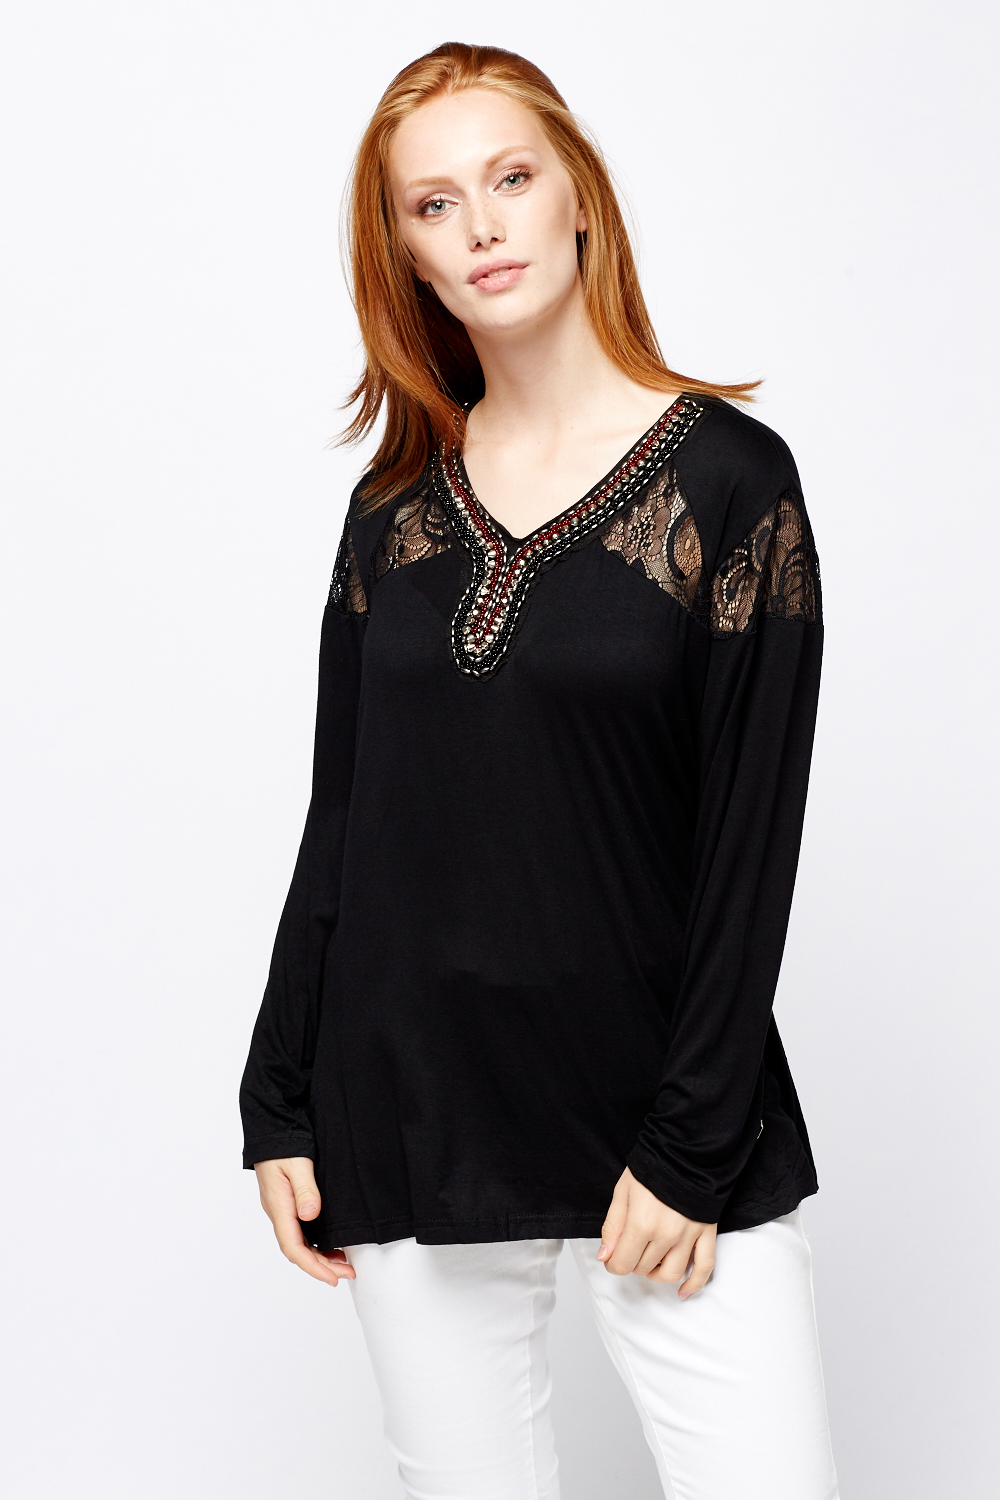 Lace Insert Beaded Neck Top - Just $7